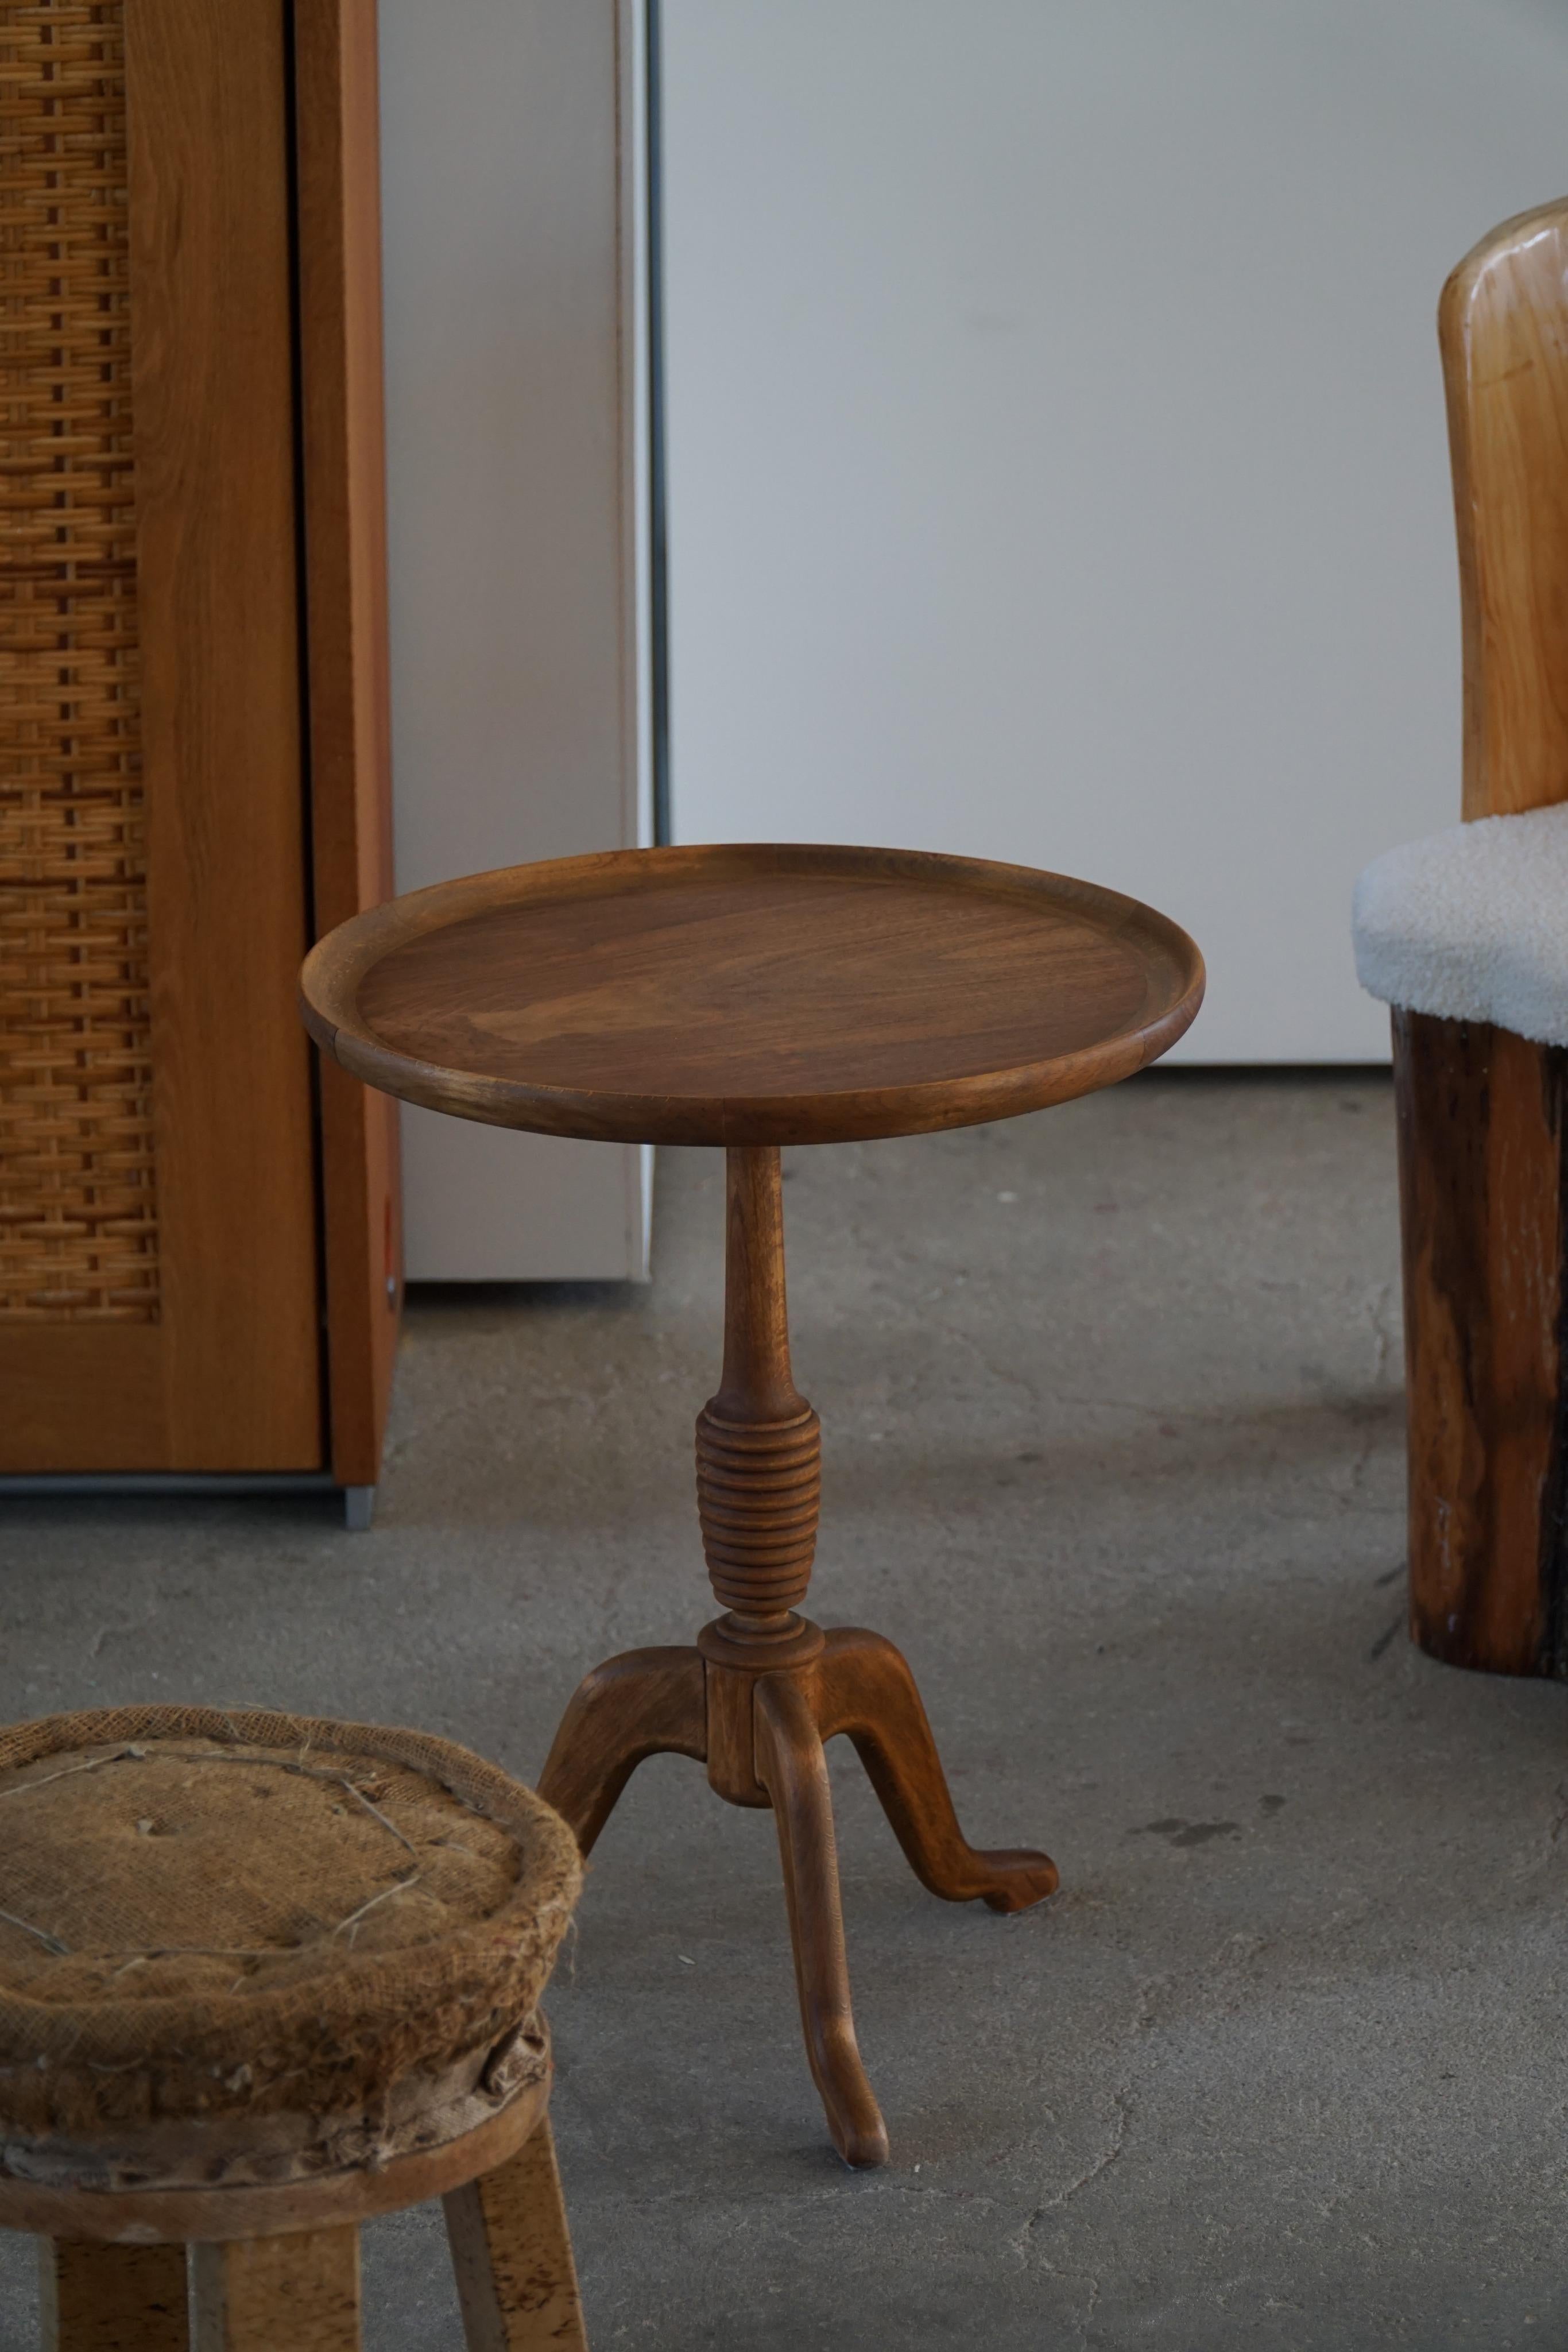 Round side table / coffee table in solid oak with elegant twisted tripod legs. Made by Anton Kildeberg for FK Furniture, Denmark, in ca 1960s. Model 